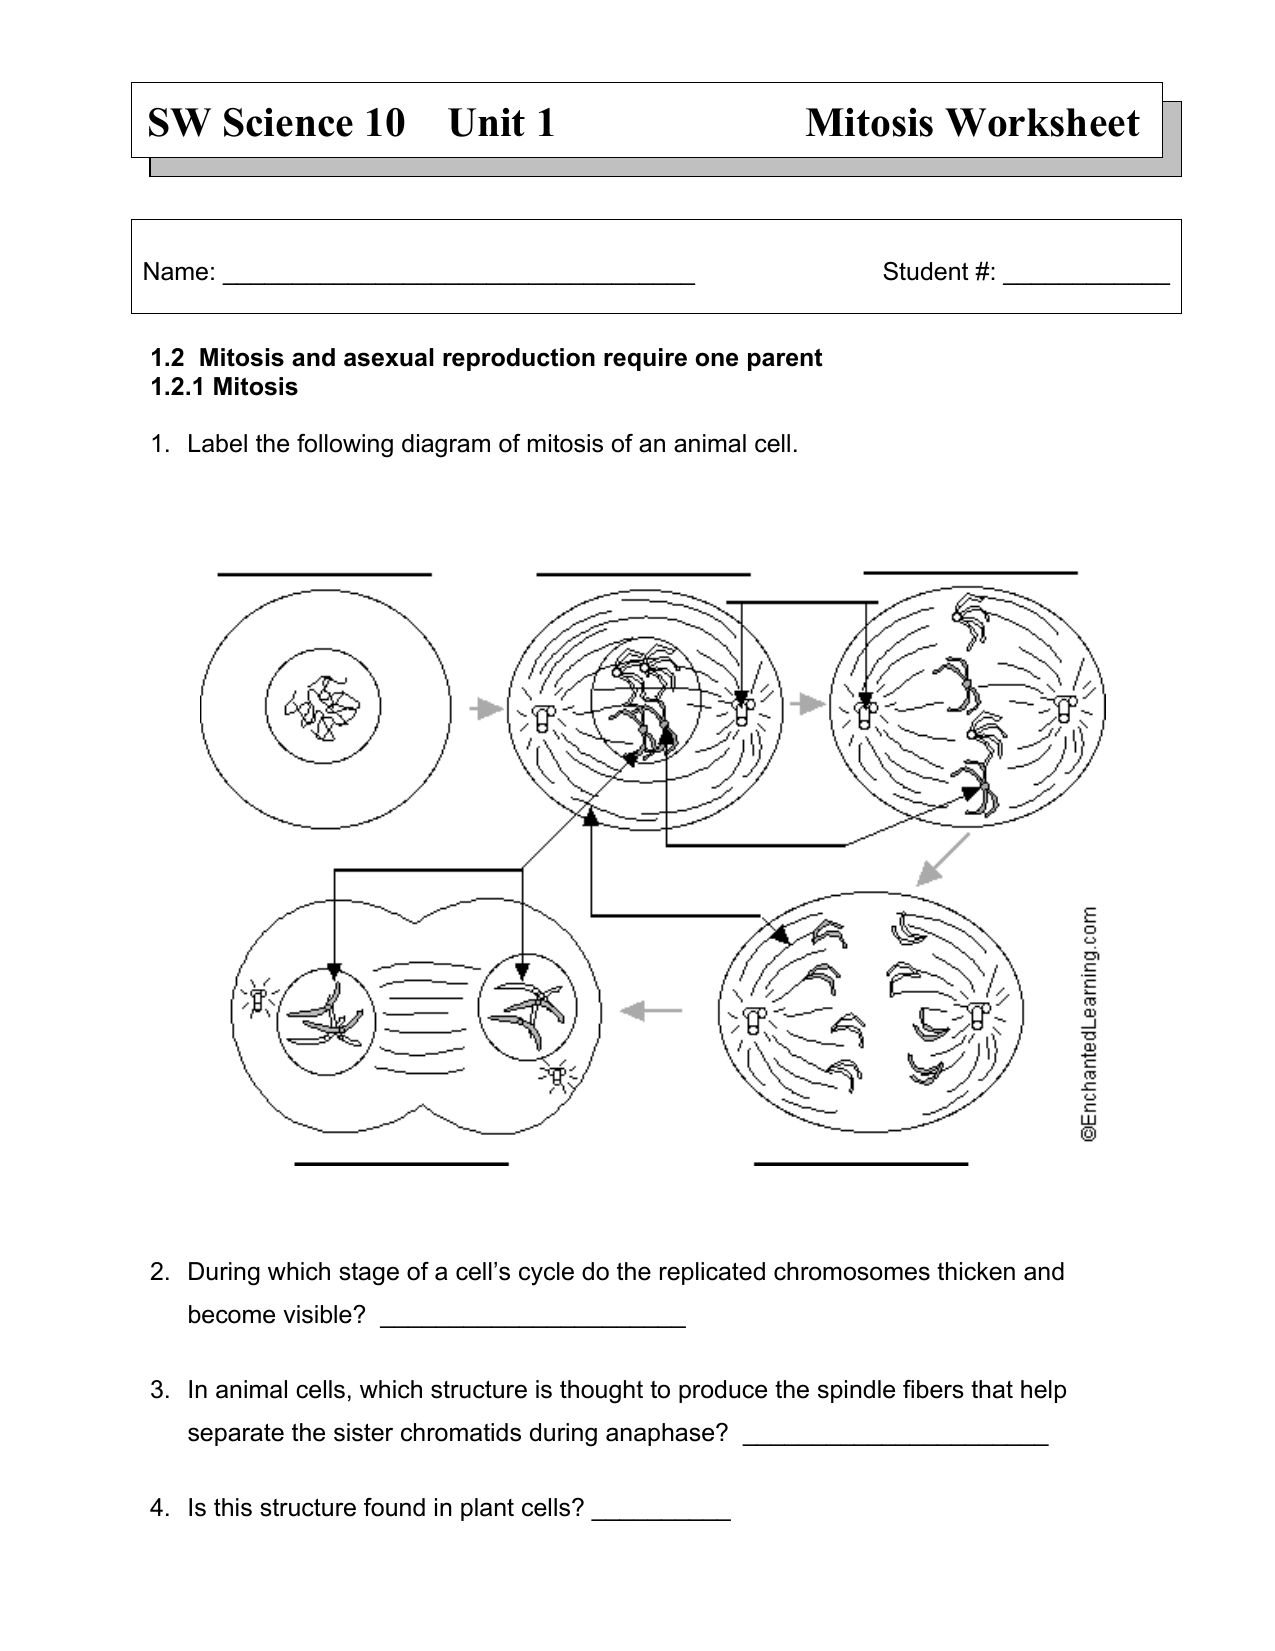 SW Science 22 Unit 22 Mitosis Worksheet With Onion Cell Mitosis Worksheet Answers